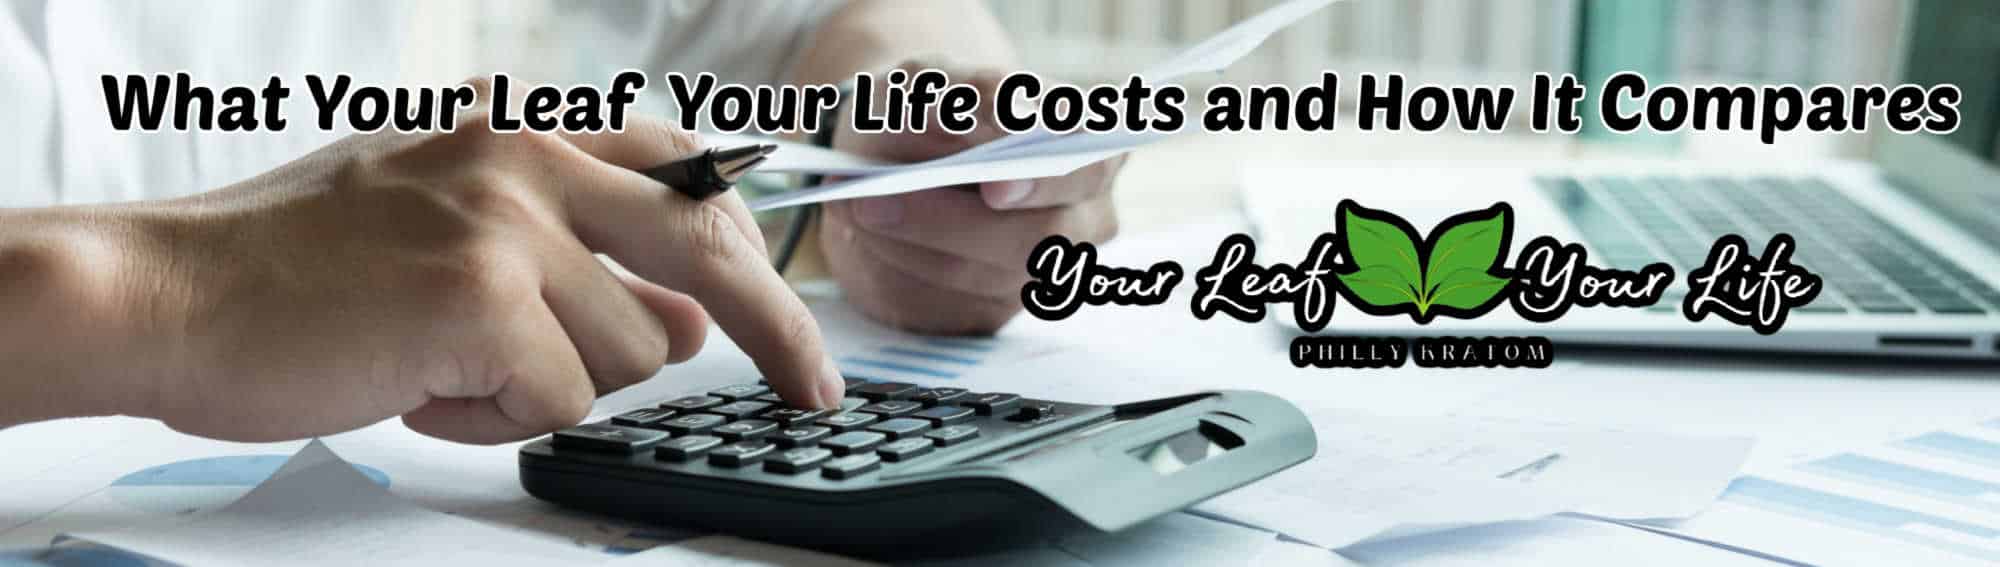 image of your leaf your life kratom cost and how it compares